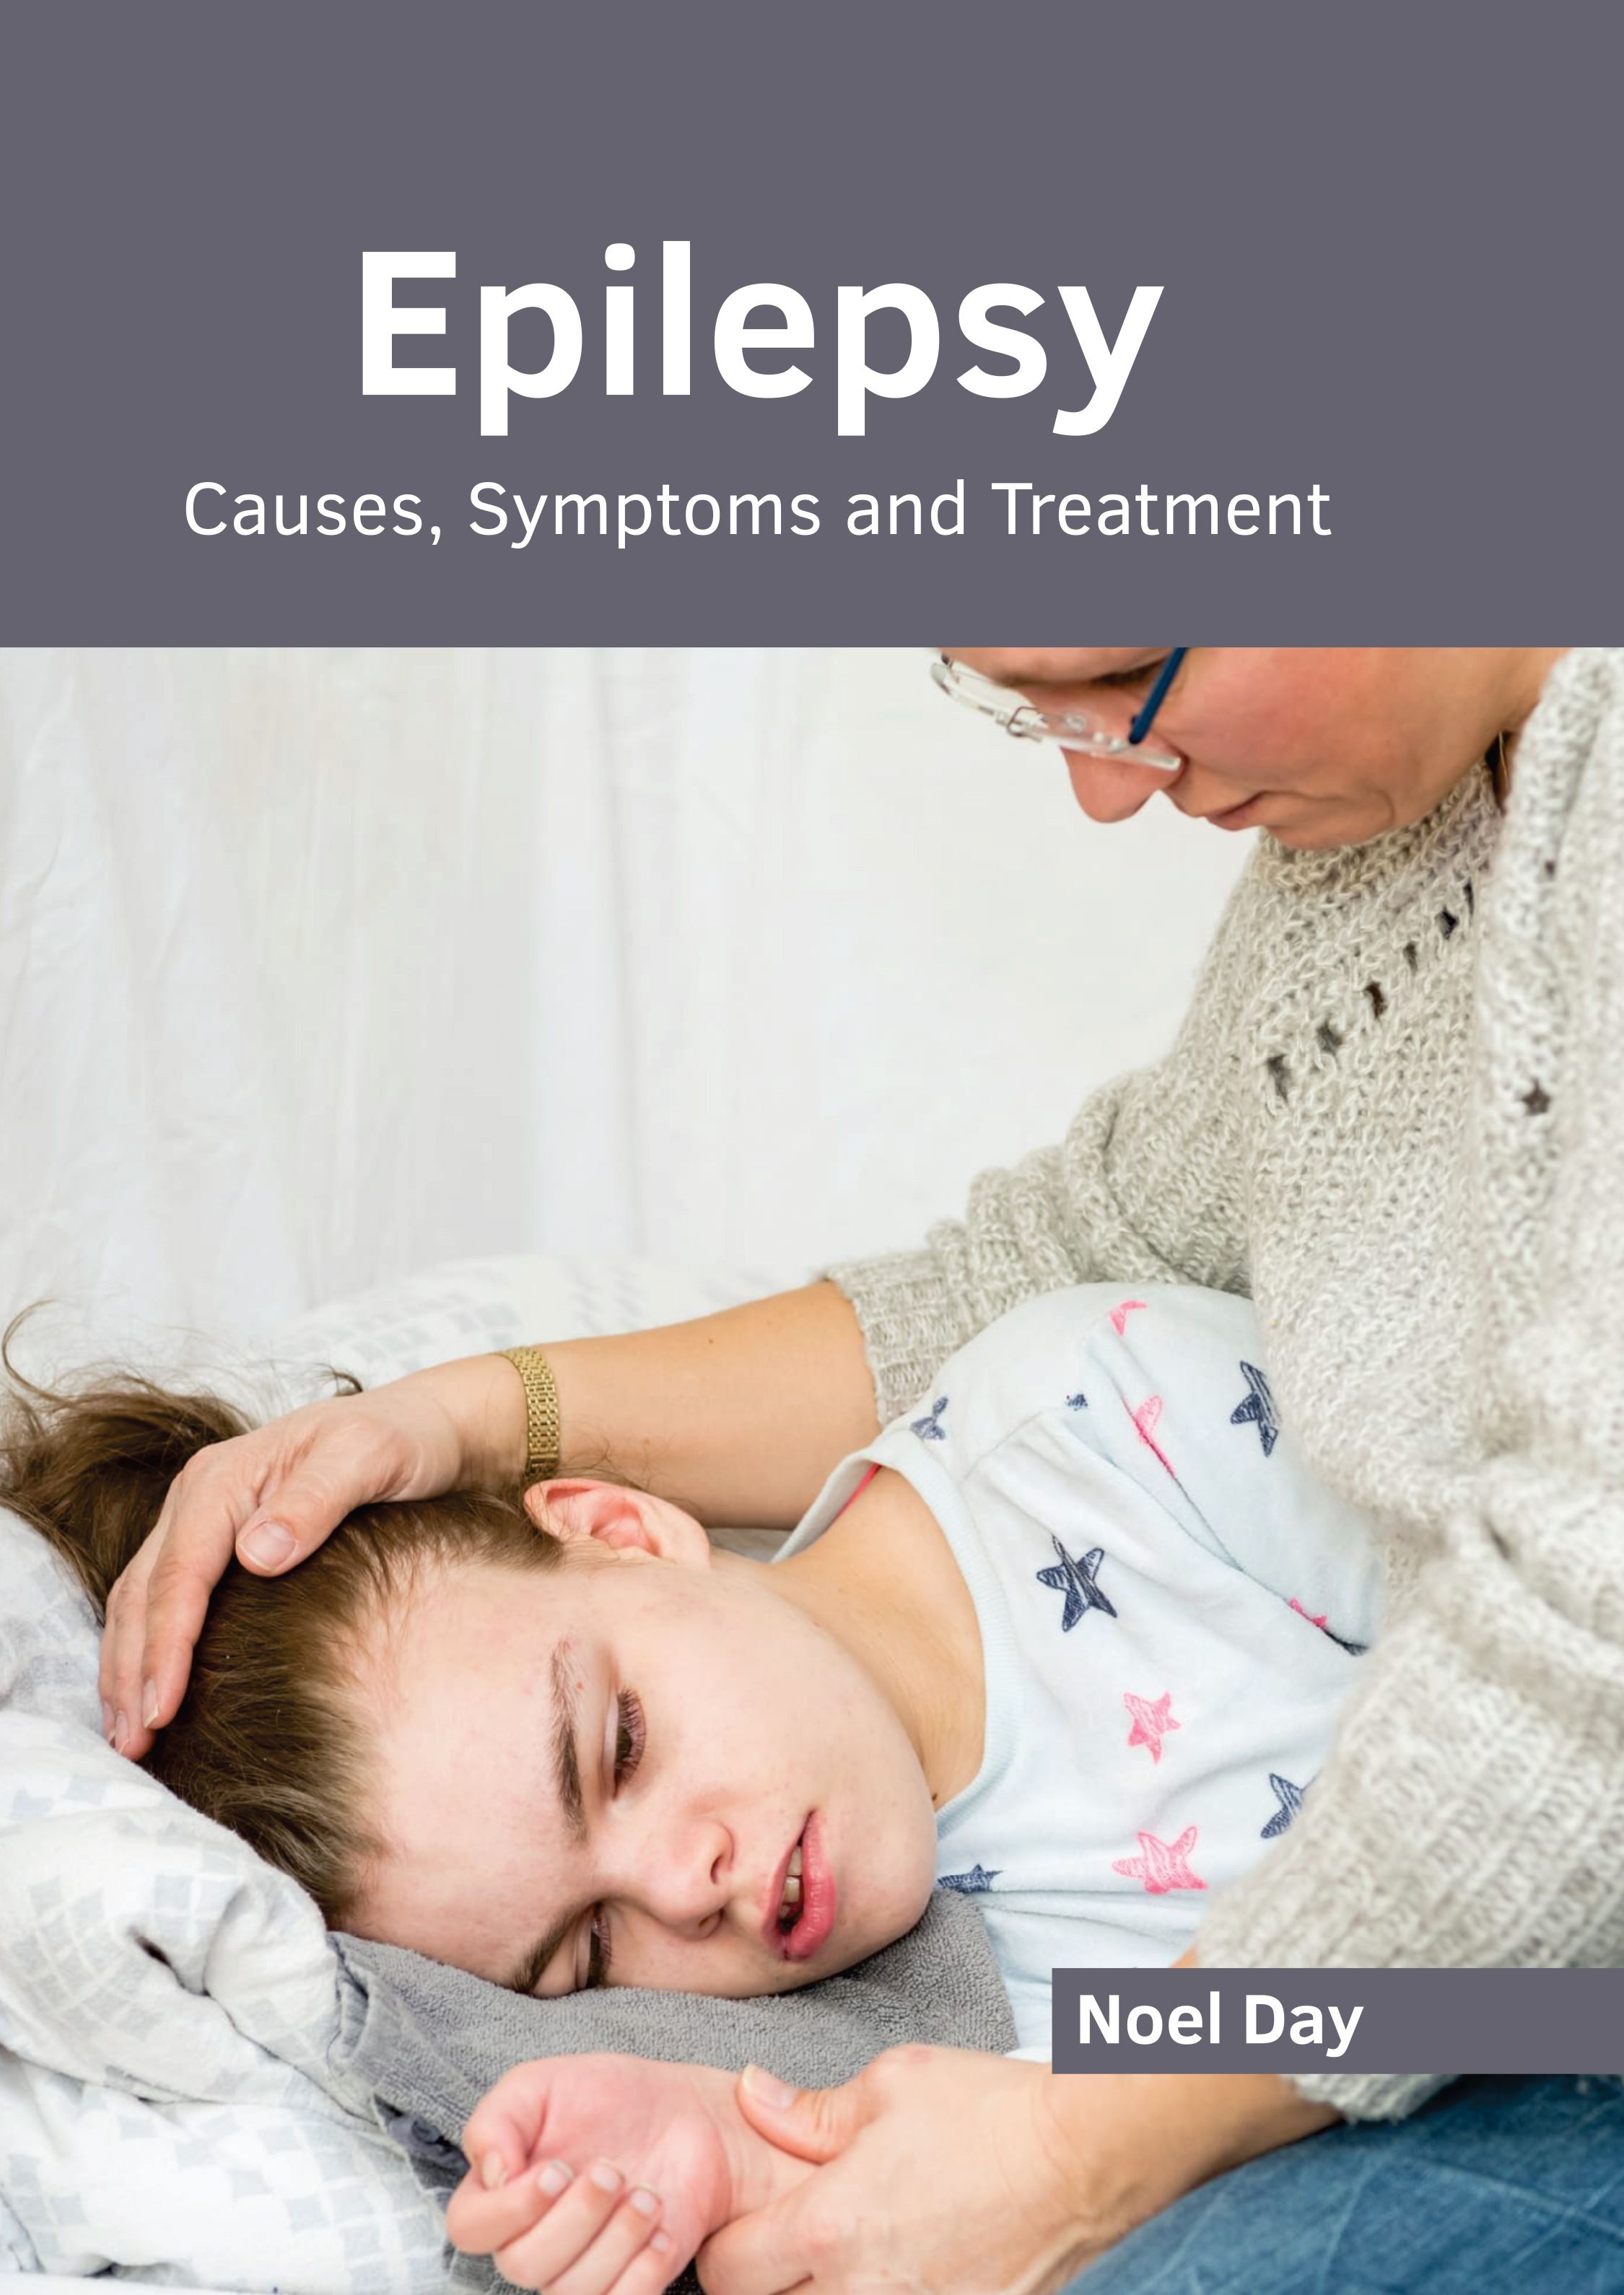 EPILEPSY: CAUSES, SYMPTOMS AND TREATMENT